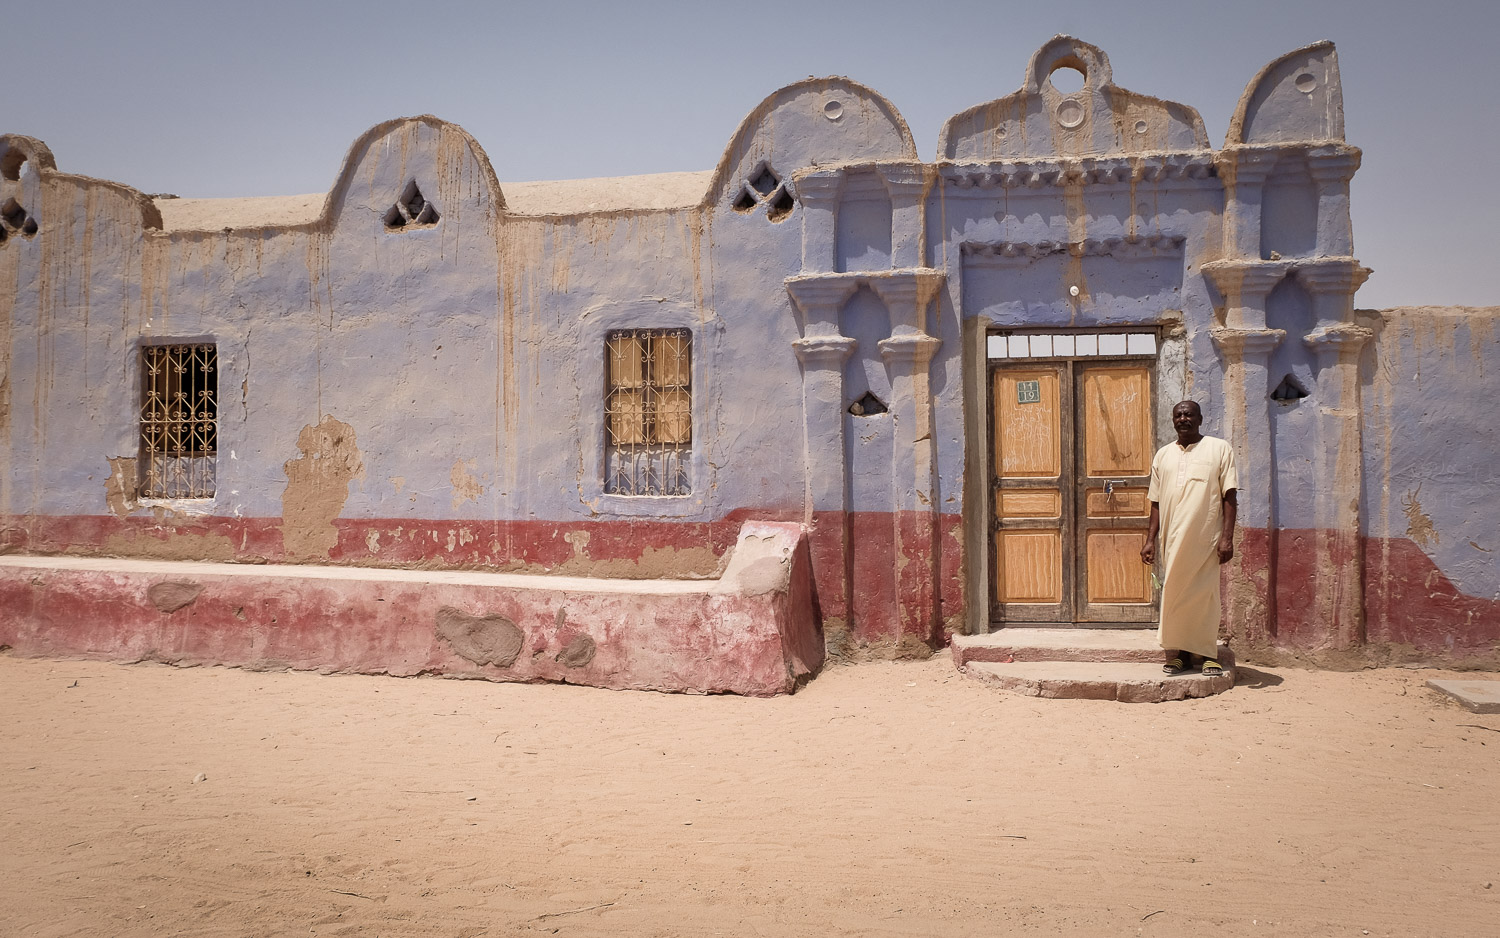 A Nubian poet stands in front of a traditional Nubian house, West Aswan (photo: Maya Hautefeuille)